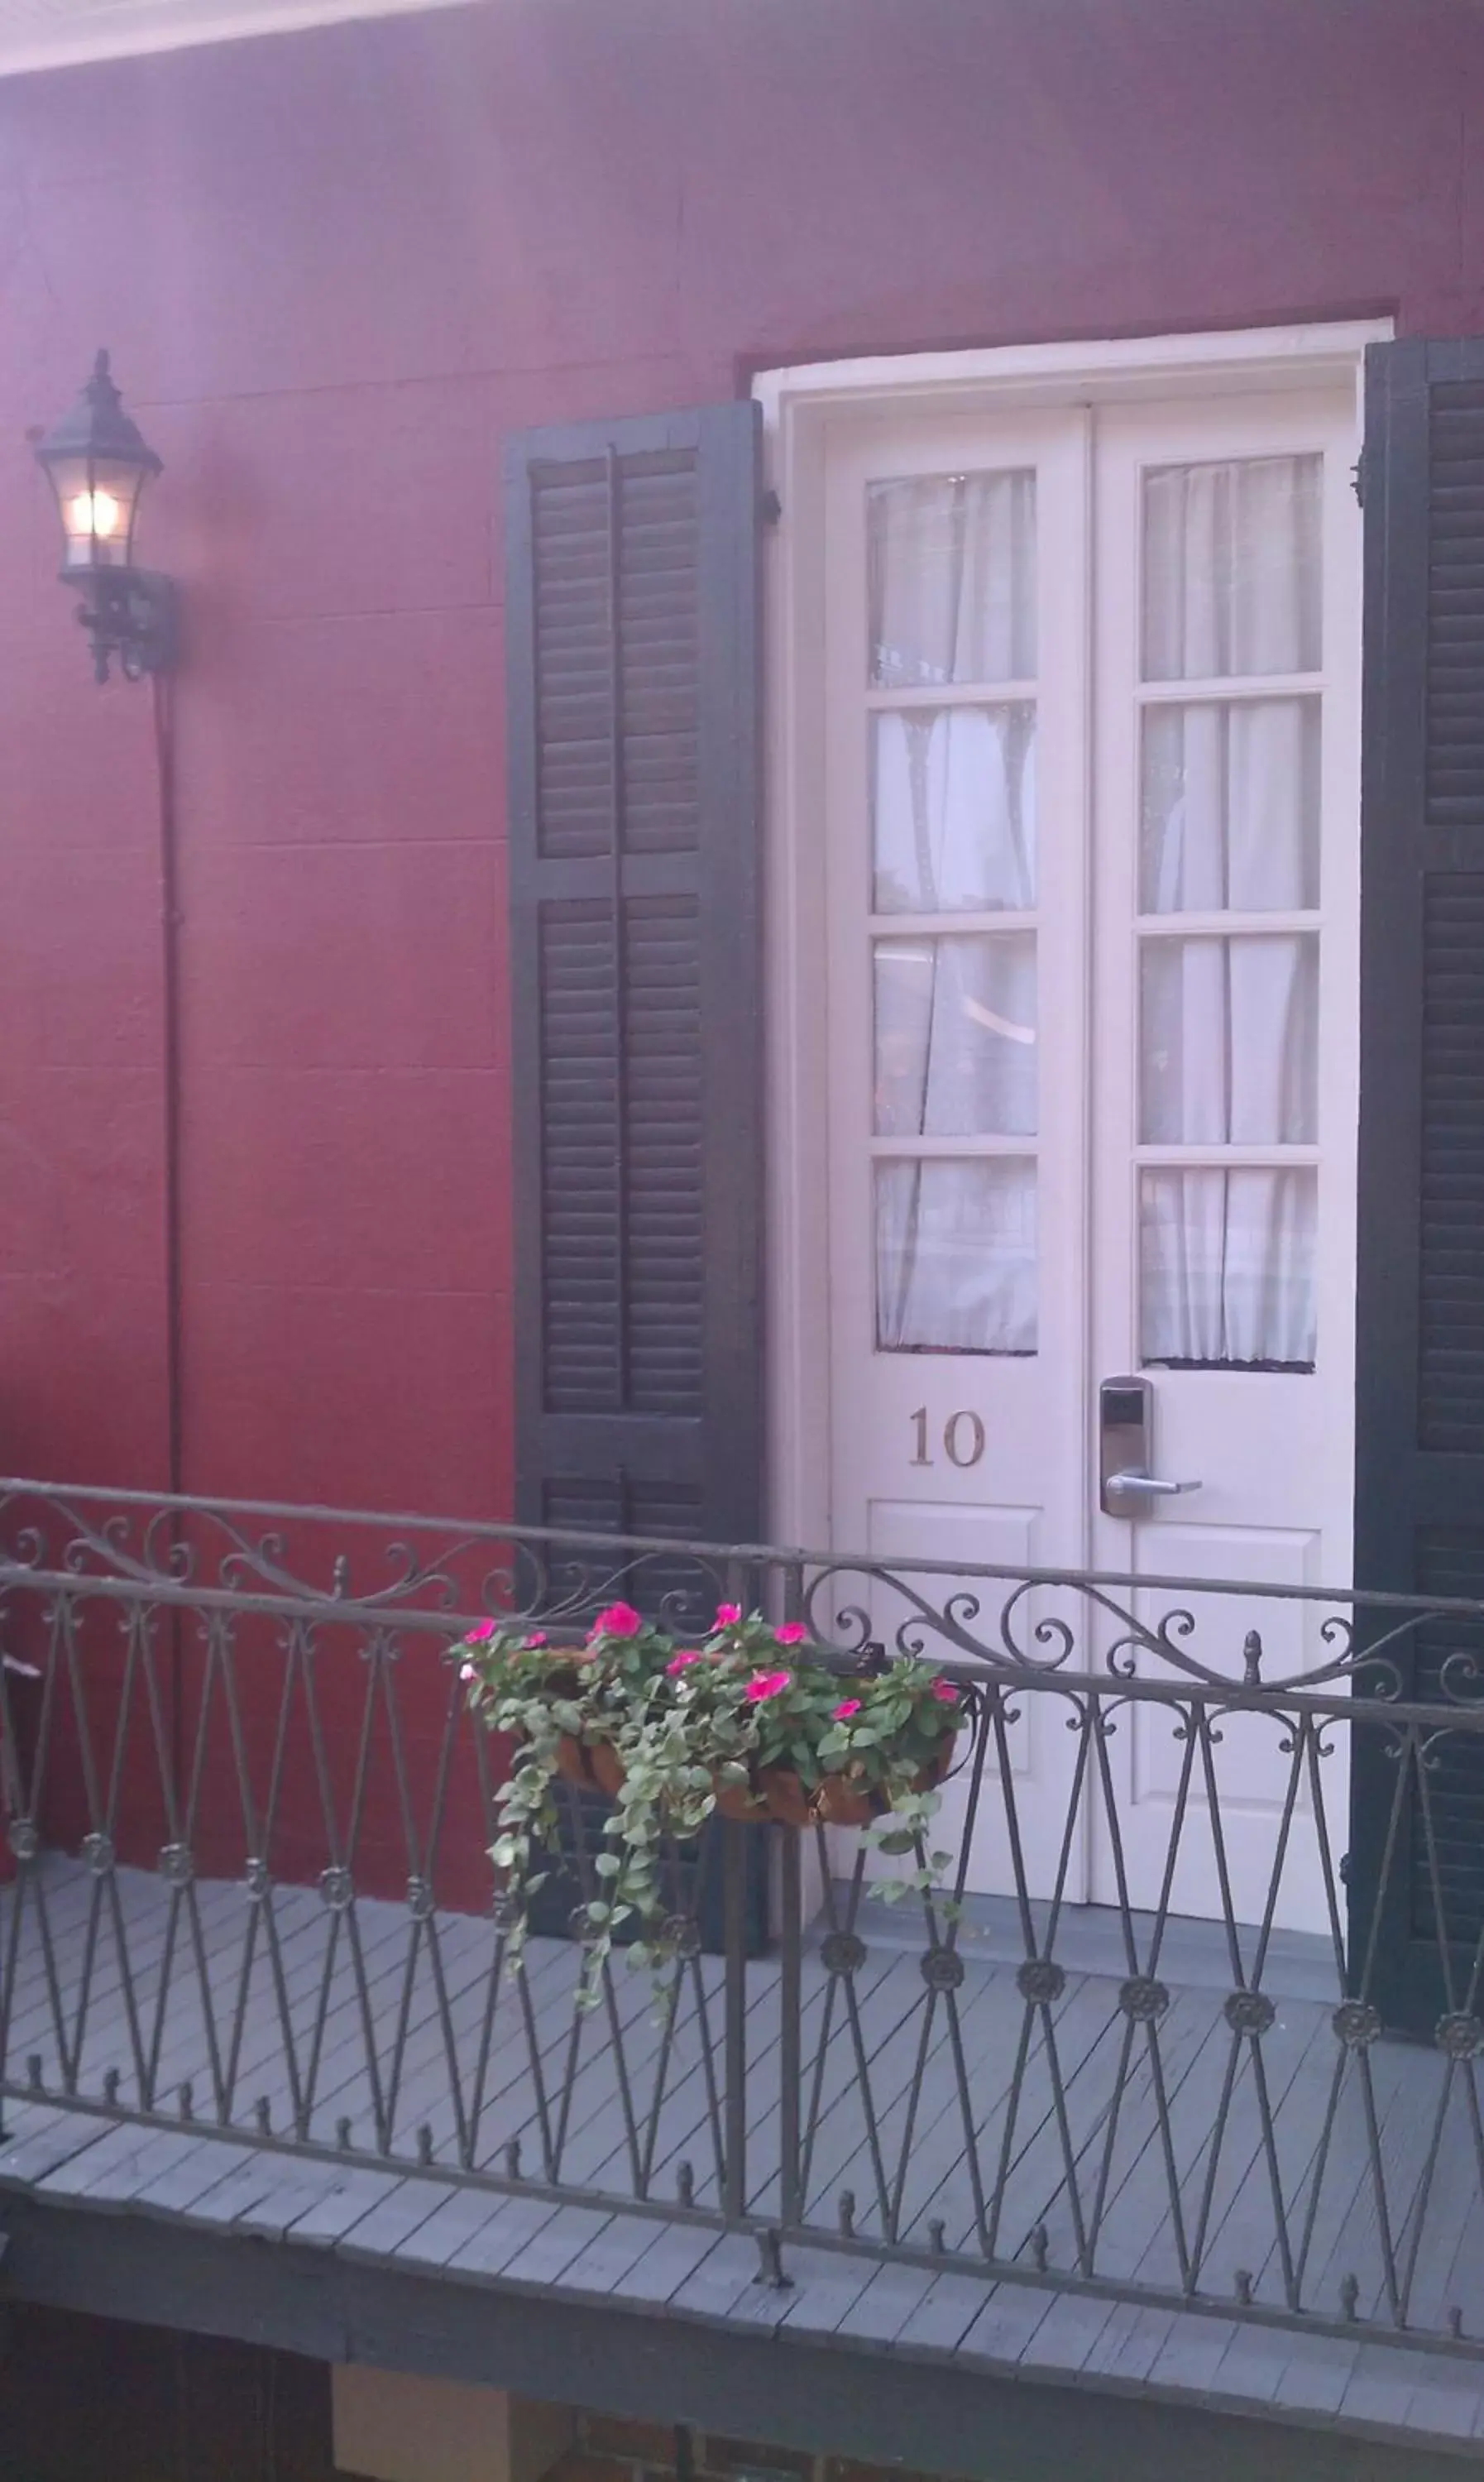 Balcony/Terrace in Inn on St. Peter, a French Quarter Guest Houses Property